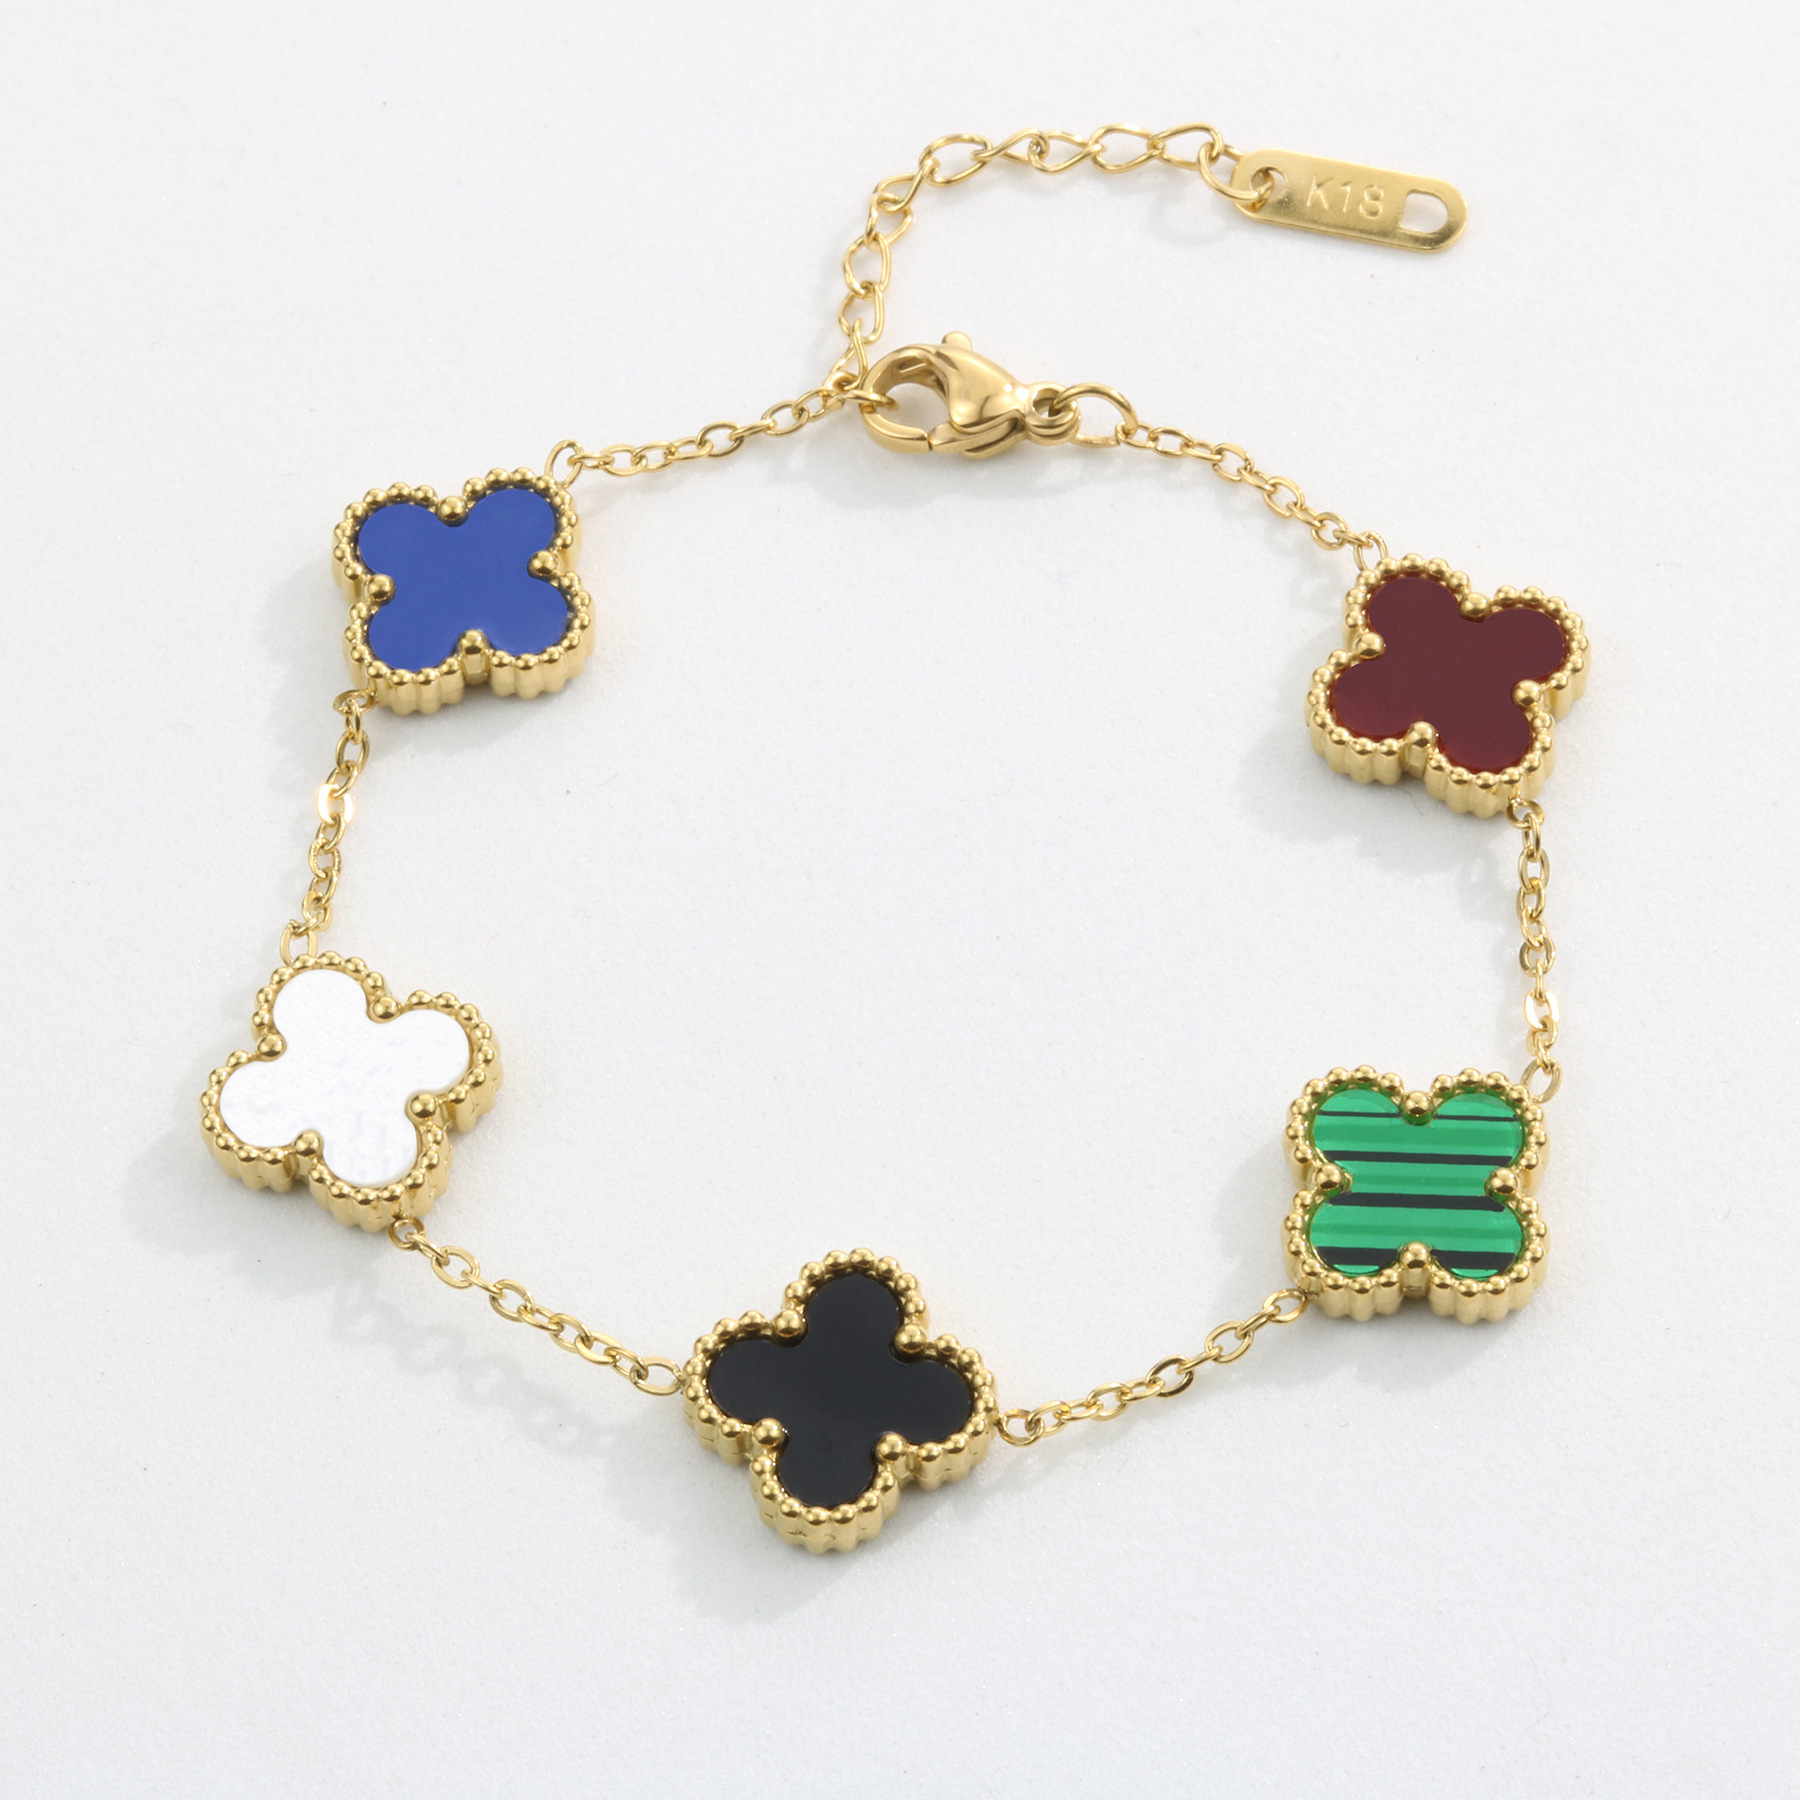 Adjustable New Design Gold Plated Stainless Steel 316L Plant Flower Bracelet With Five Leaf Petals Women's Luxury Gifts